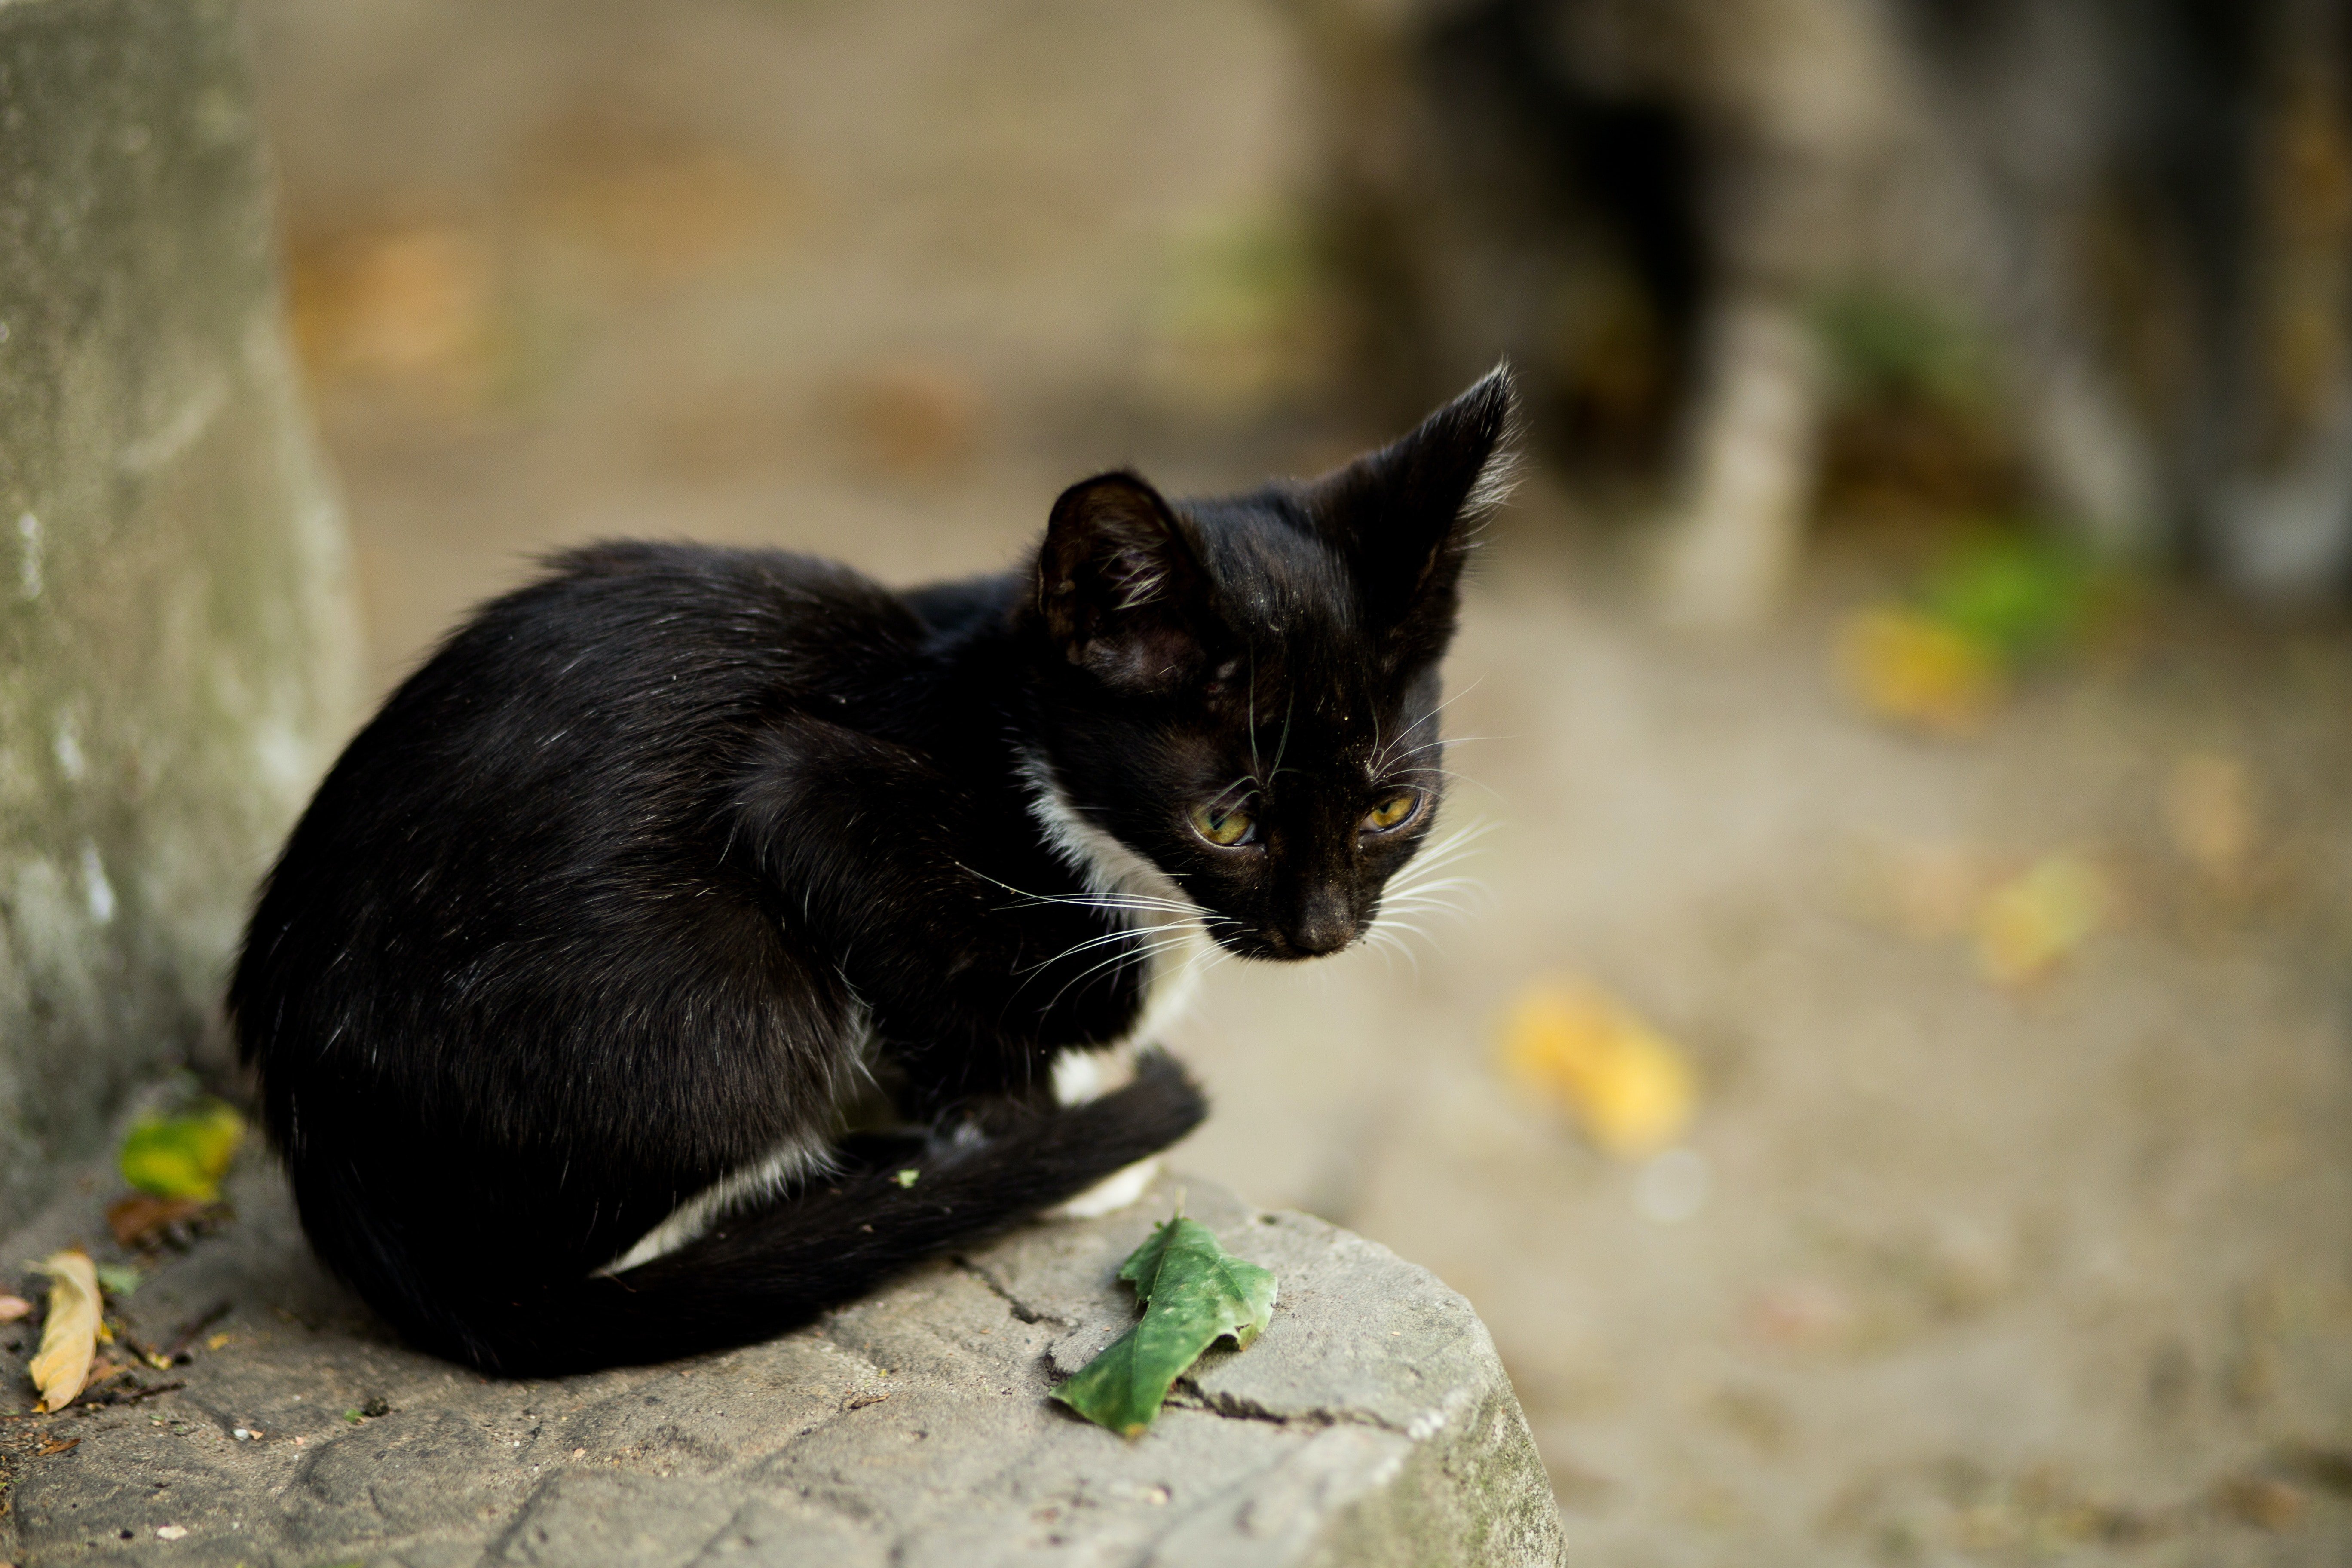 A black cat tried to call Jeffrey and Pamela's attention. | Source: Pexels